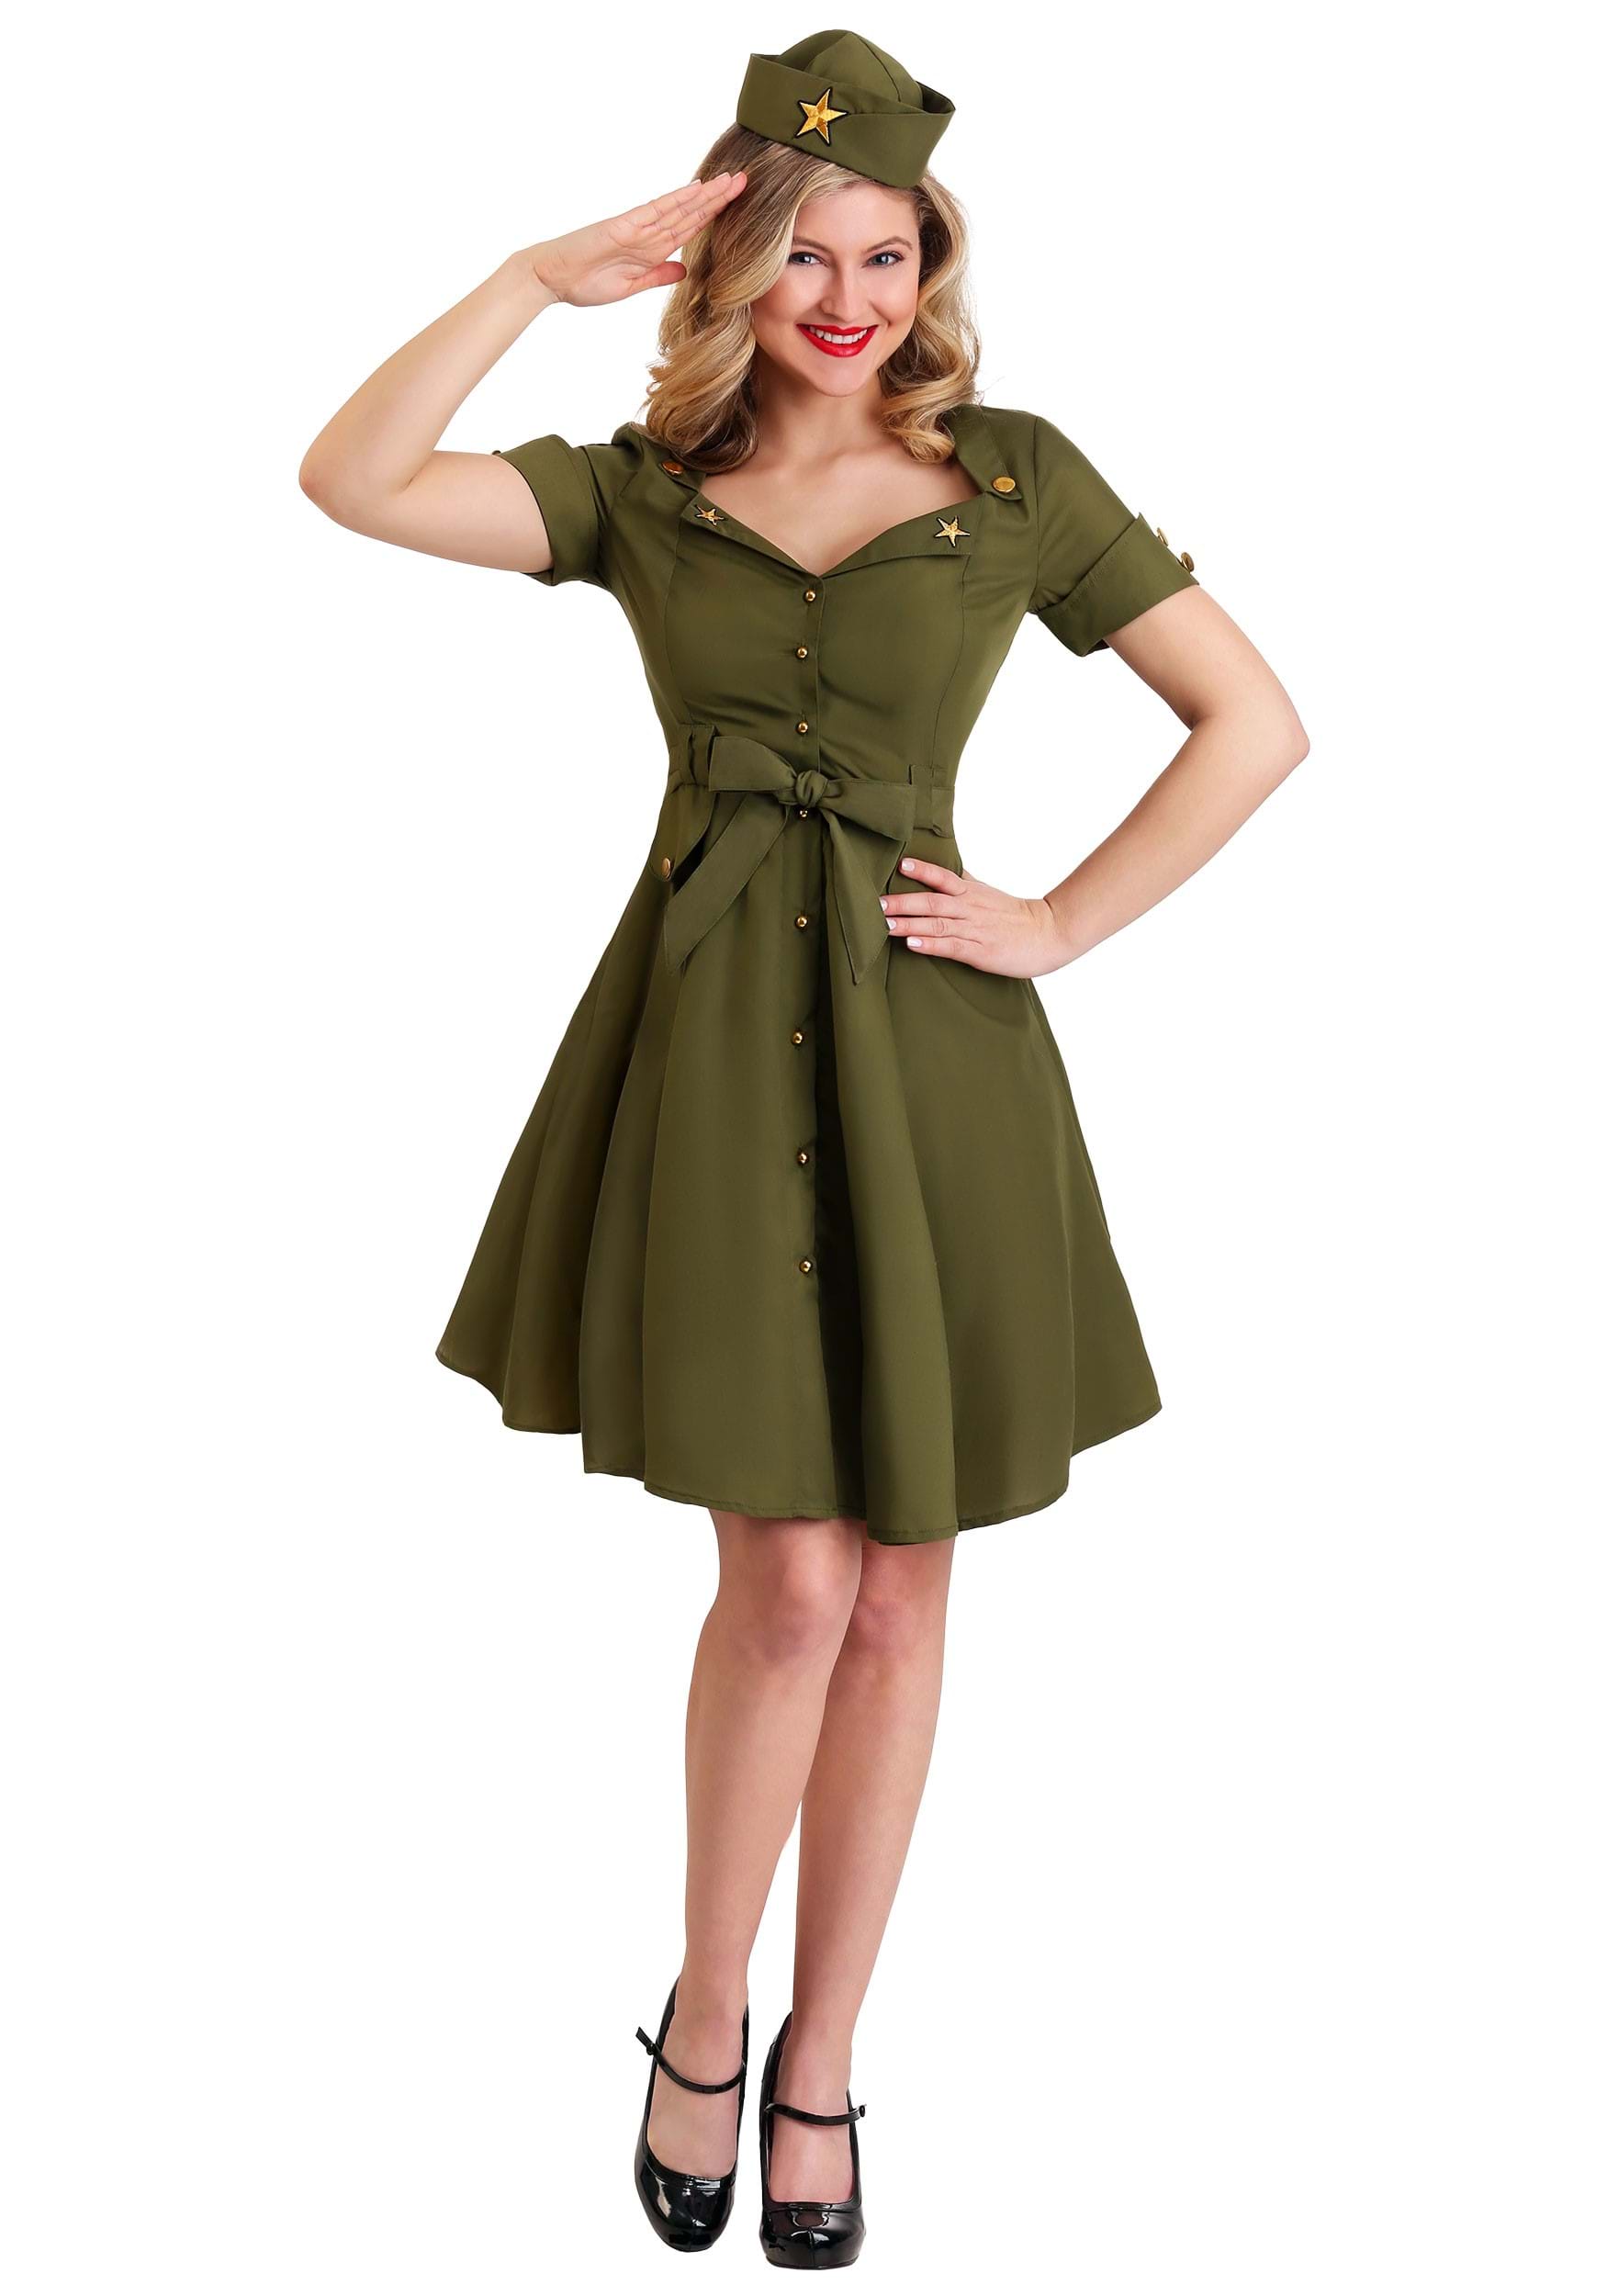 Pin Up Girl Costumes | Pin Up Costumes Womens Vintage Combat Cutie Costume Dress $39.99 AT vintagedancer.com